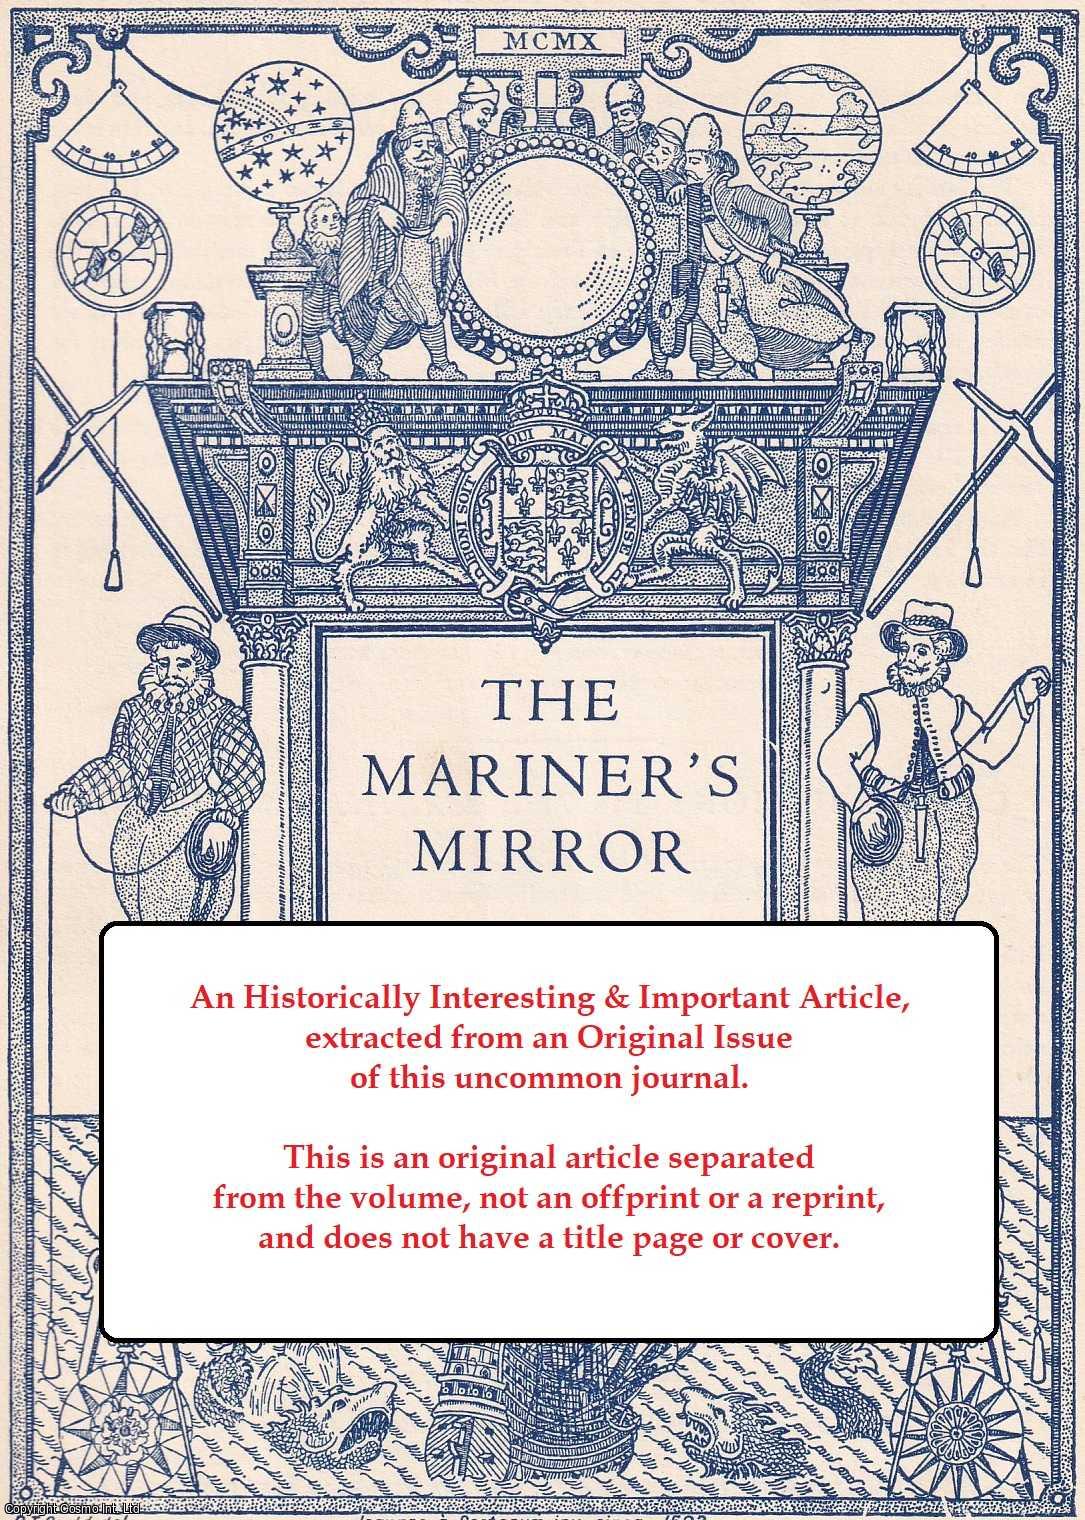 Randal Gray - Spinola's Galleys in The Narrow Seas, 1599-1603. An original article from the Mariner's Mirror, 1978.